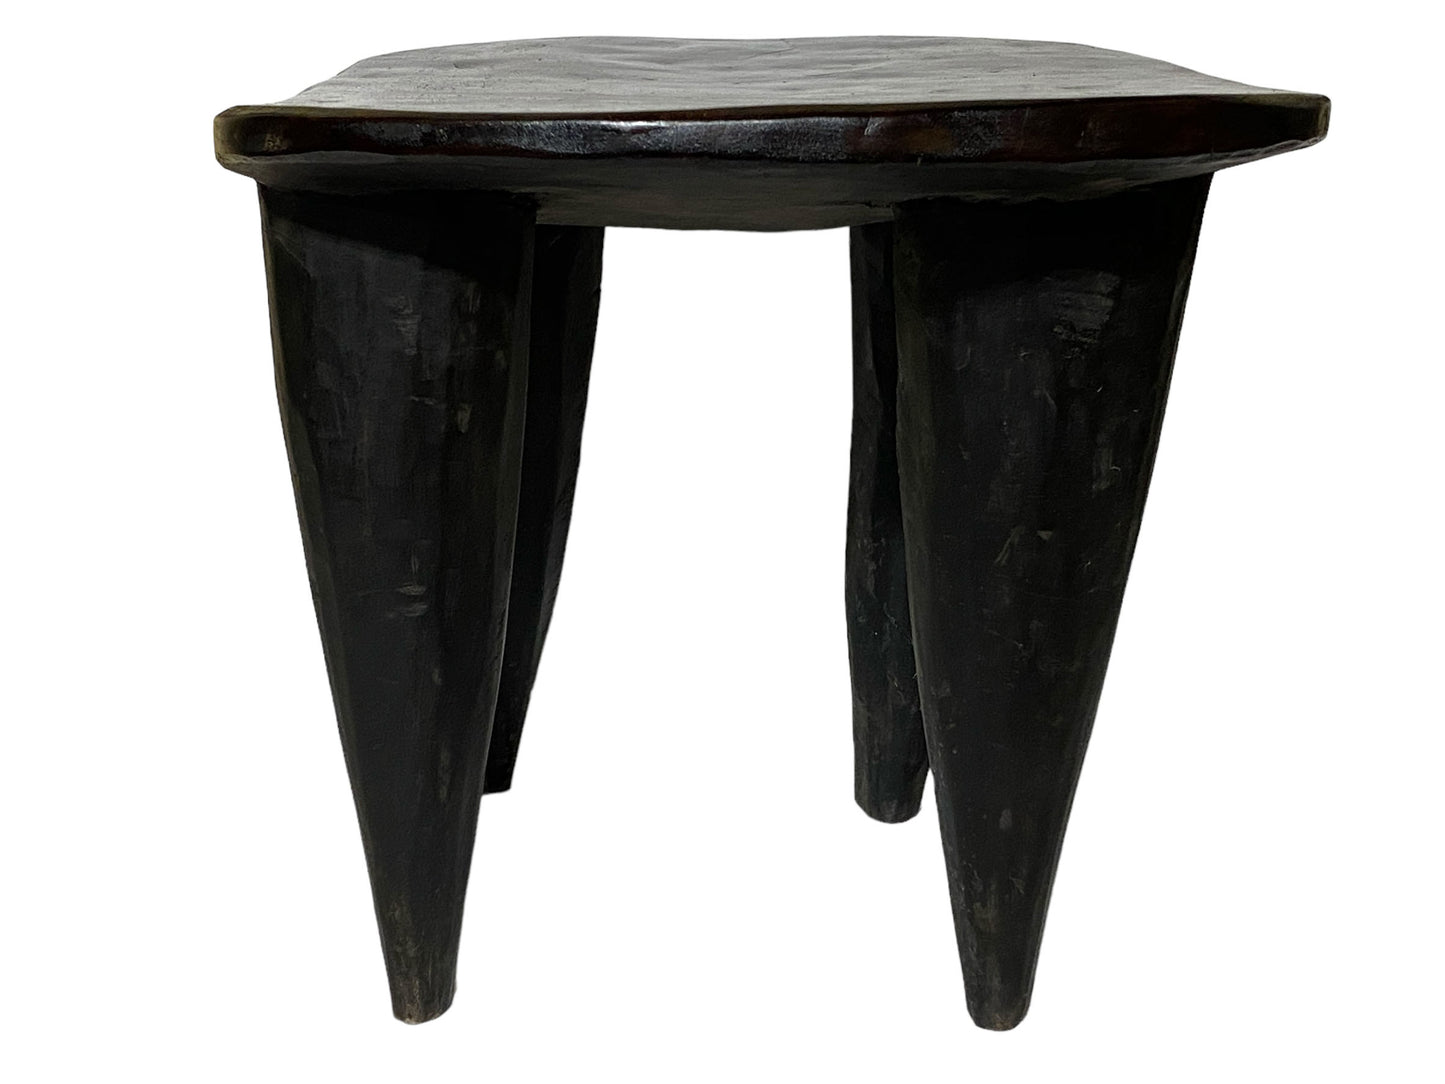 # 5915 African Carved Wood Senufo Table/Stool 21.25" W